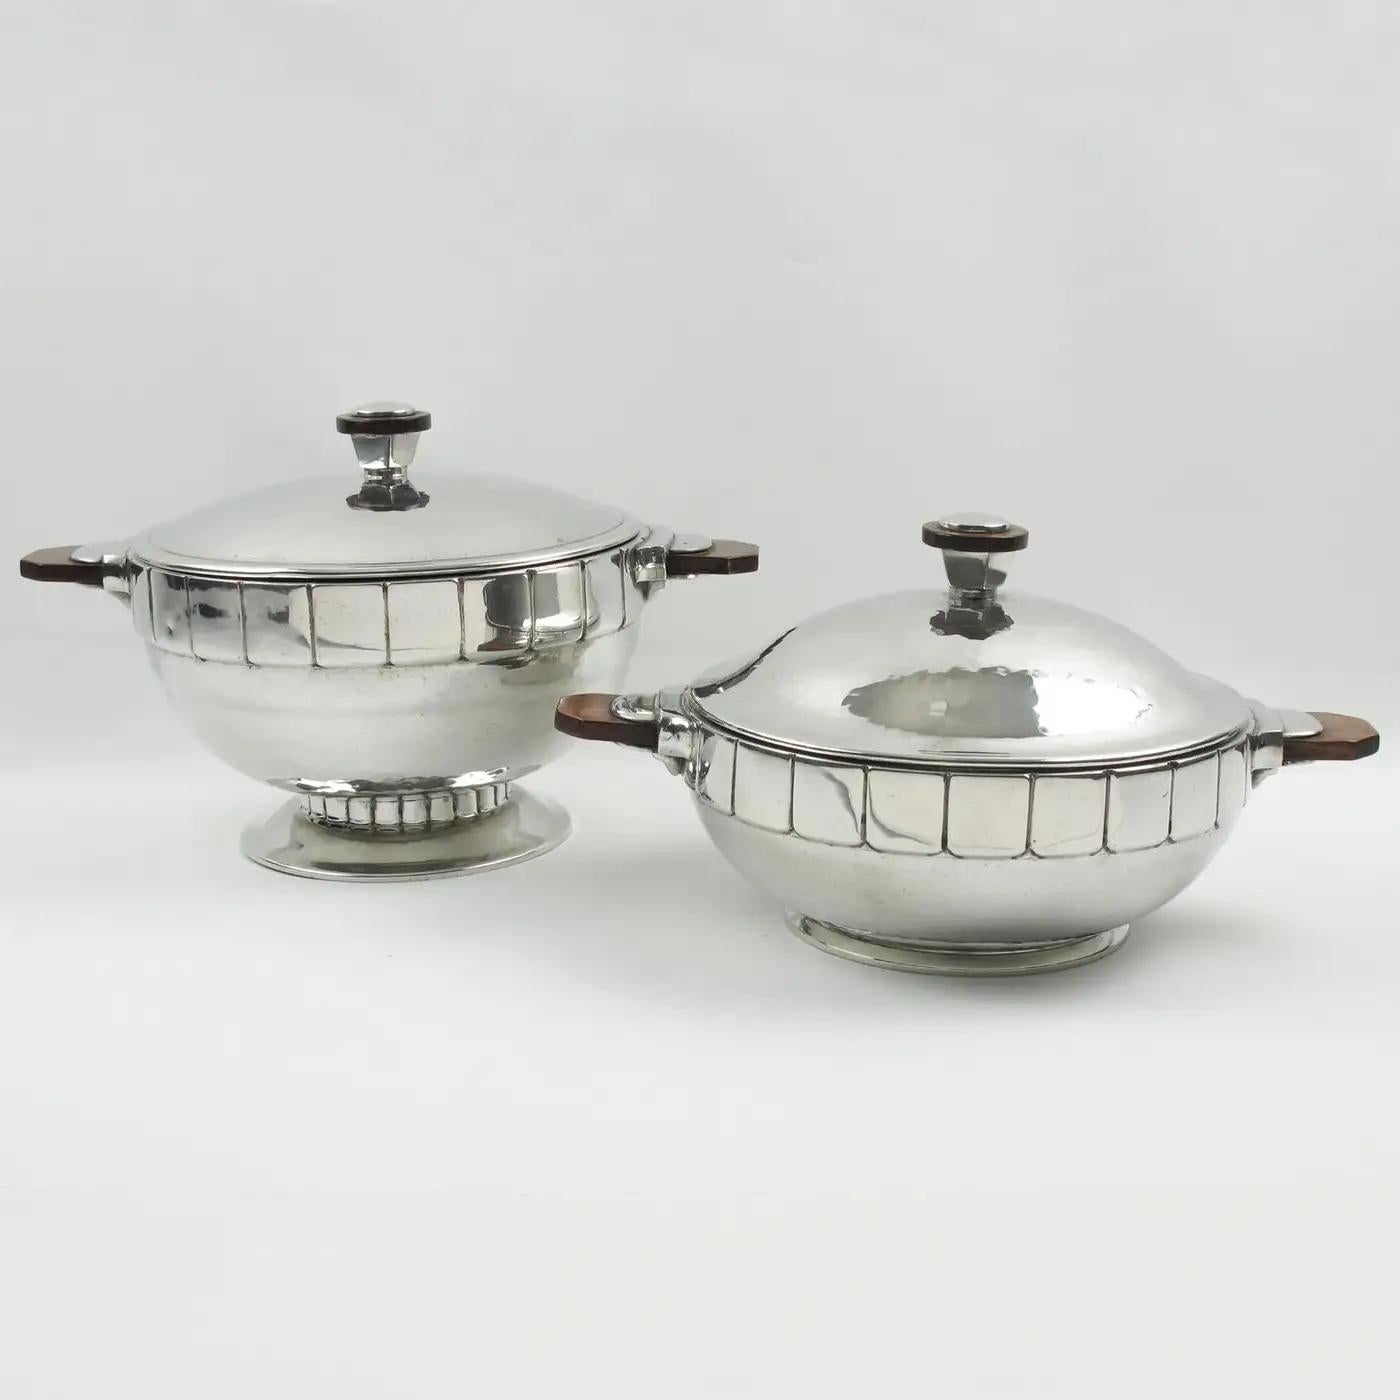 Art Deco Pewter Tureen Covered Dish Centerpiece by H.J. Swiss, 1940s For Sale 3